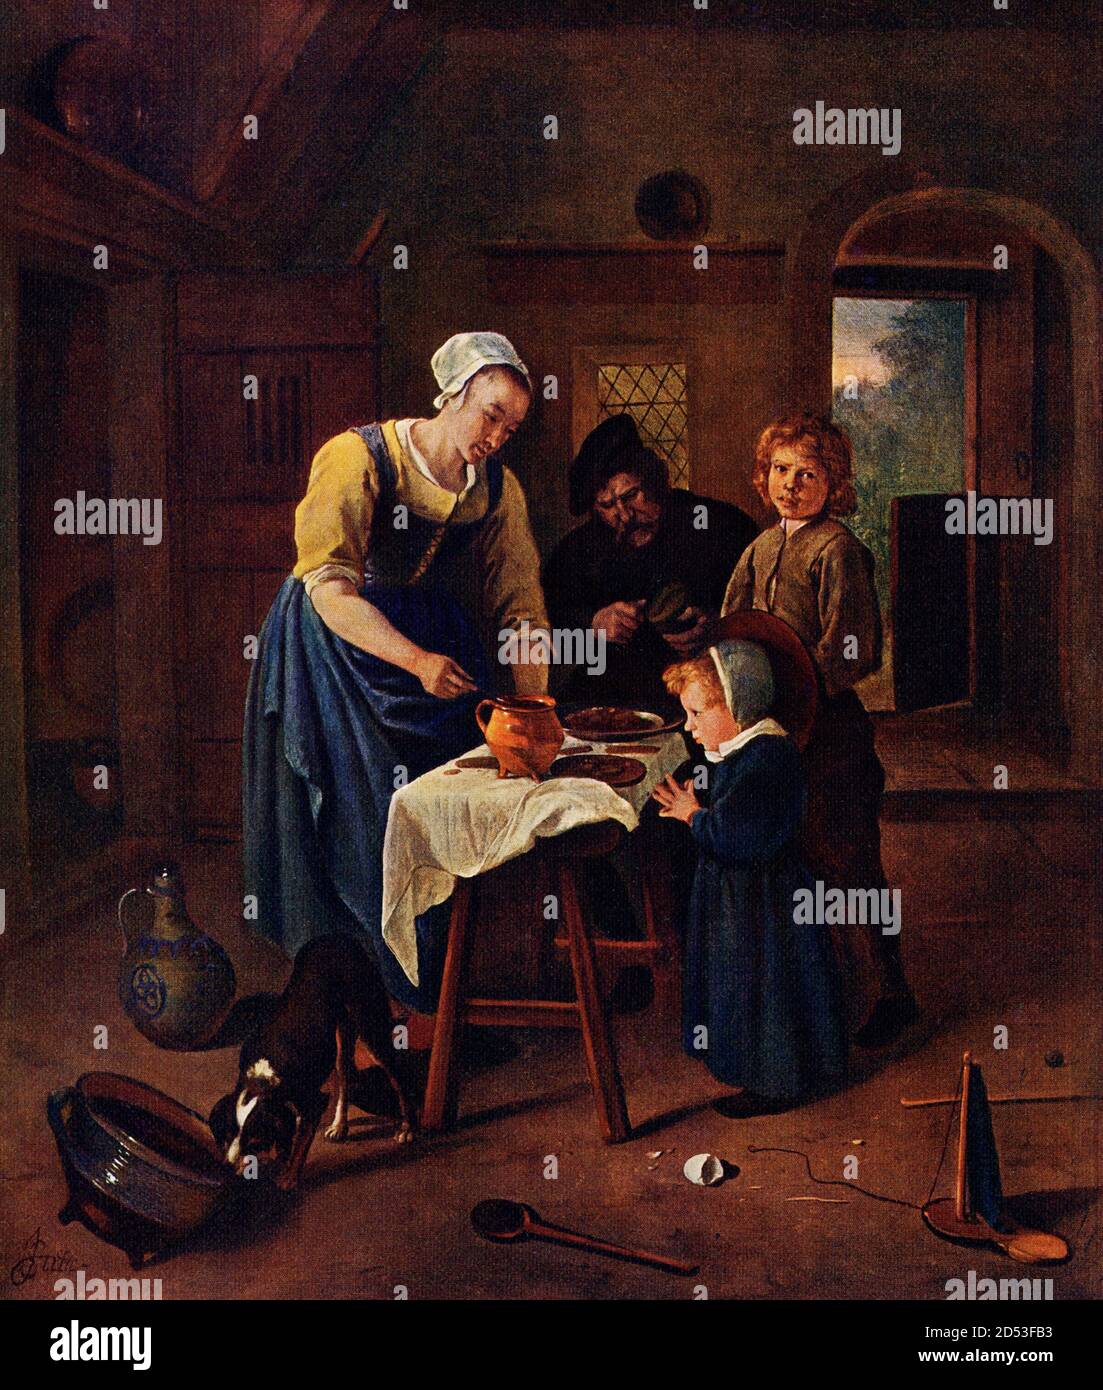 This painting, titled Grace before Meat, was done by the Dutch Golden age painter Jan Steen (1626-1679). Steen combined a genius for painting with jovial habits which were not marked by moderation. In spite of this, he produced a large number of pictures, showing incidents of the everyday life with which he was acquainted. His general note is one of humor, and rarely does he discard it for the quiet harmony of domestic scenes which gives an added interest to such pictures as Grace Before Meat. Stock Photo